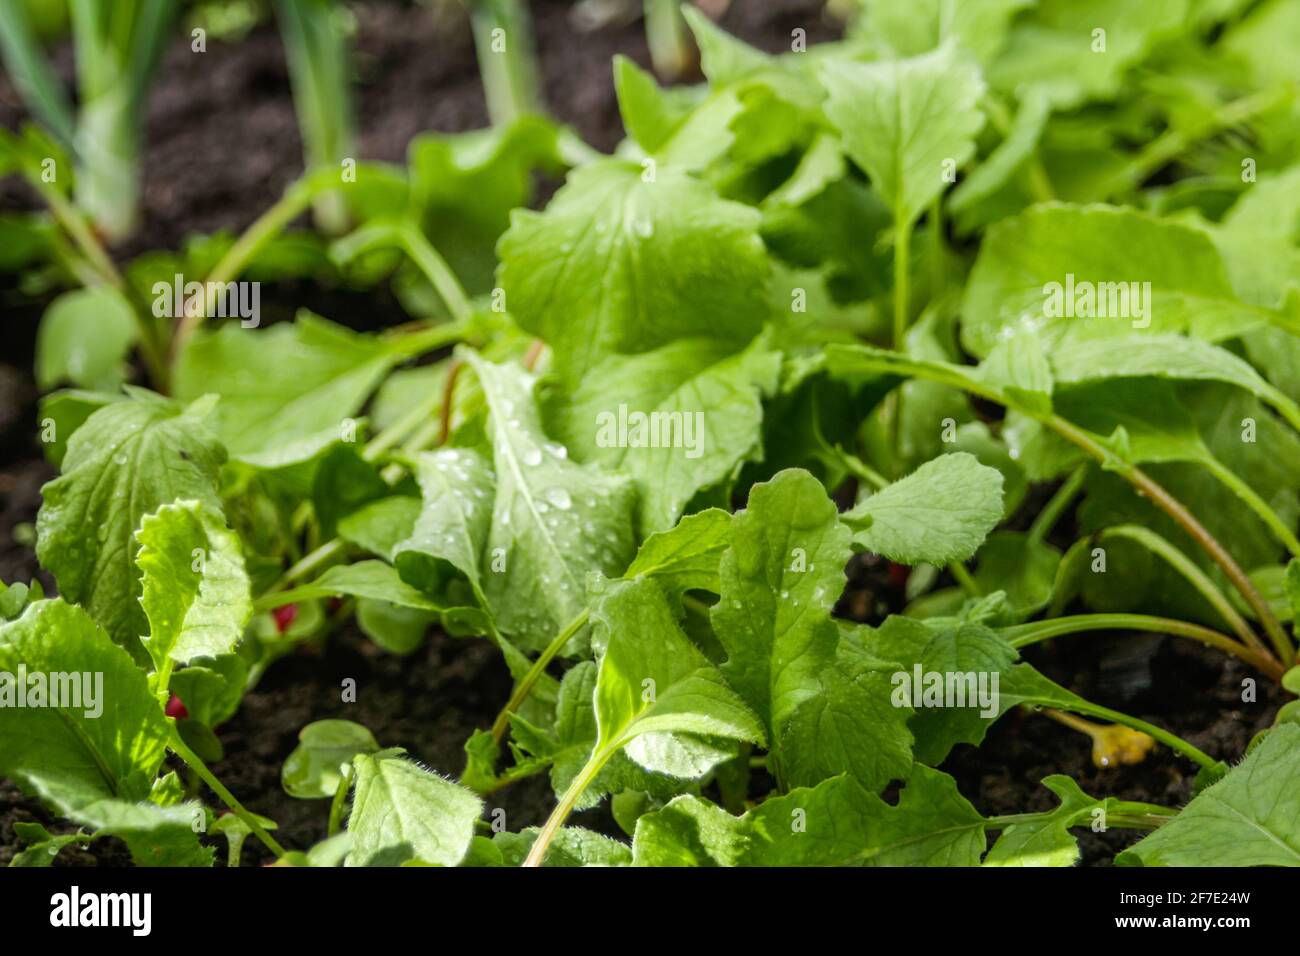 Defocus radish leaves texture. Organic radish grows in the ground. Young radishes grow in a bed in the garden. Green texture background. Out of focus. Stock Photo